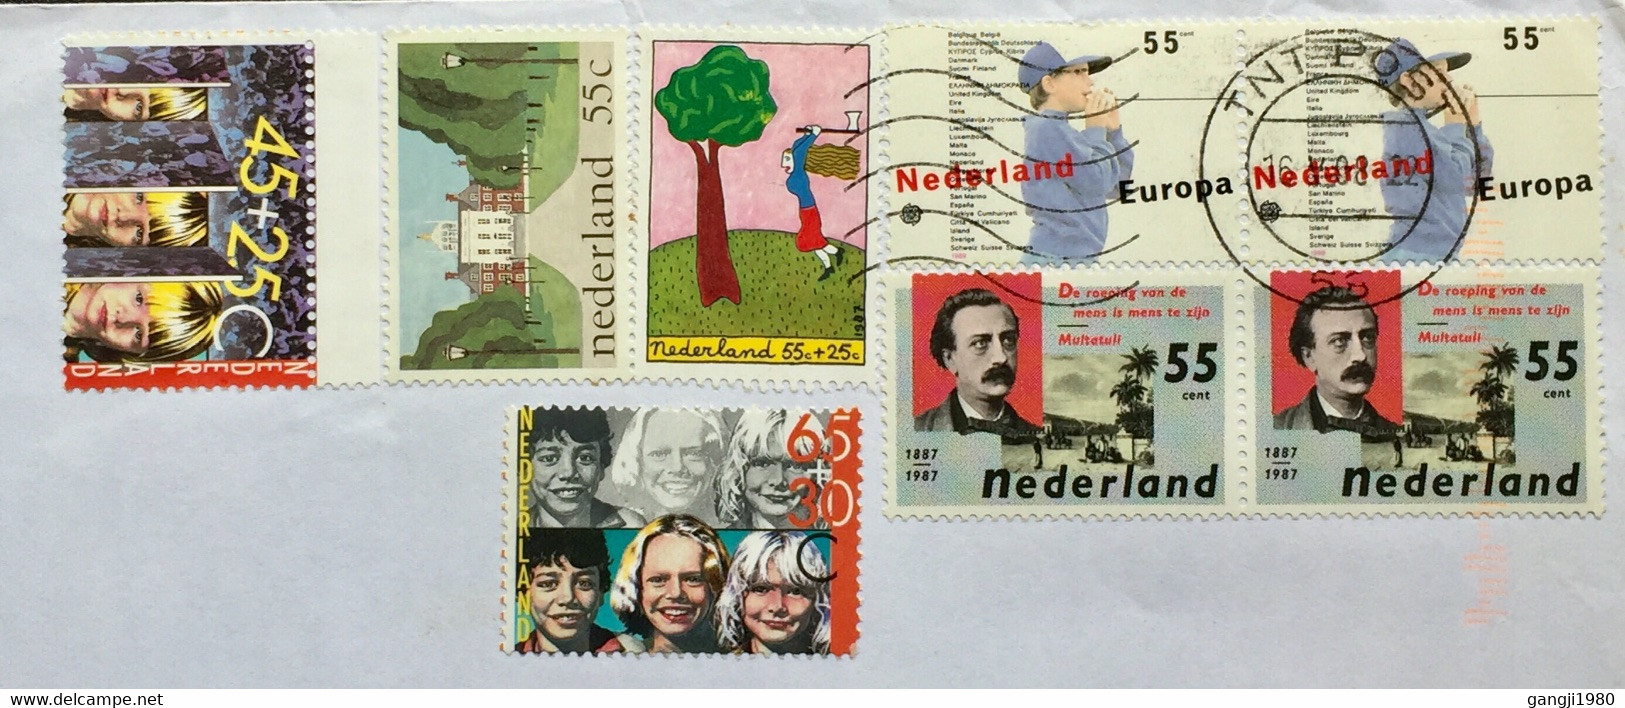 NEDERLAND 2008, AIRMAIL USED COVER TNT POST TO ENGLAND 8 STAMPS USED!!! ARCHITECTURE ,SAVE TREE ,EUROPA,CHILDREN BOYS , - Briefe U. Dokumente